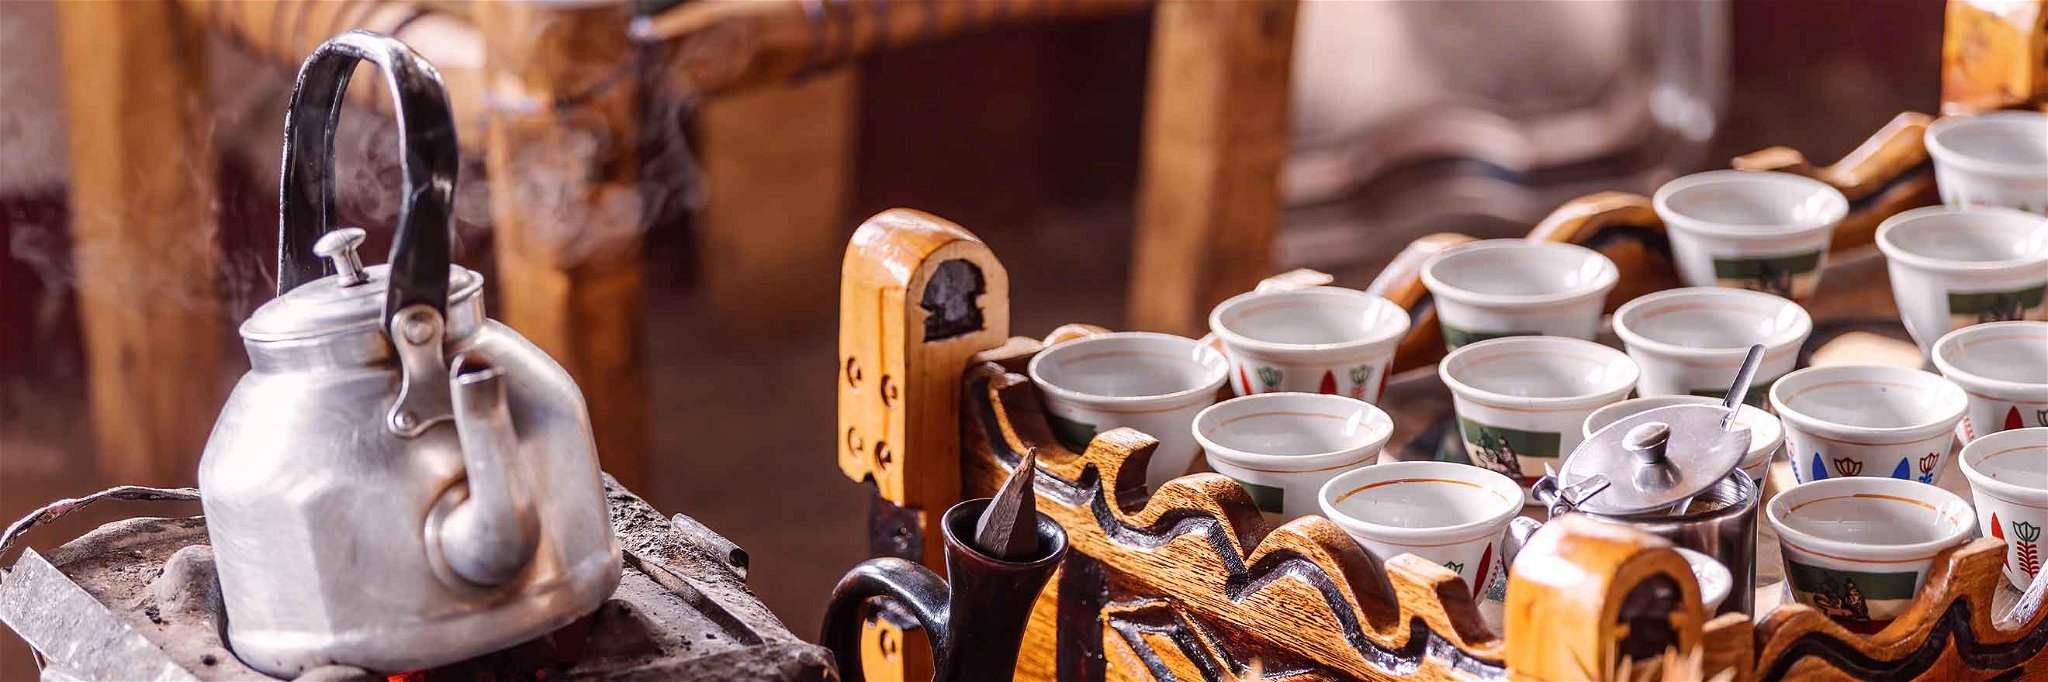 Anyone who is invited for coffee in Ethiopia should bring time with them.&nbsp;The ritual easily lasts several hours and involves several rounds.